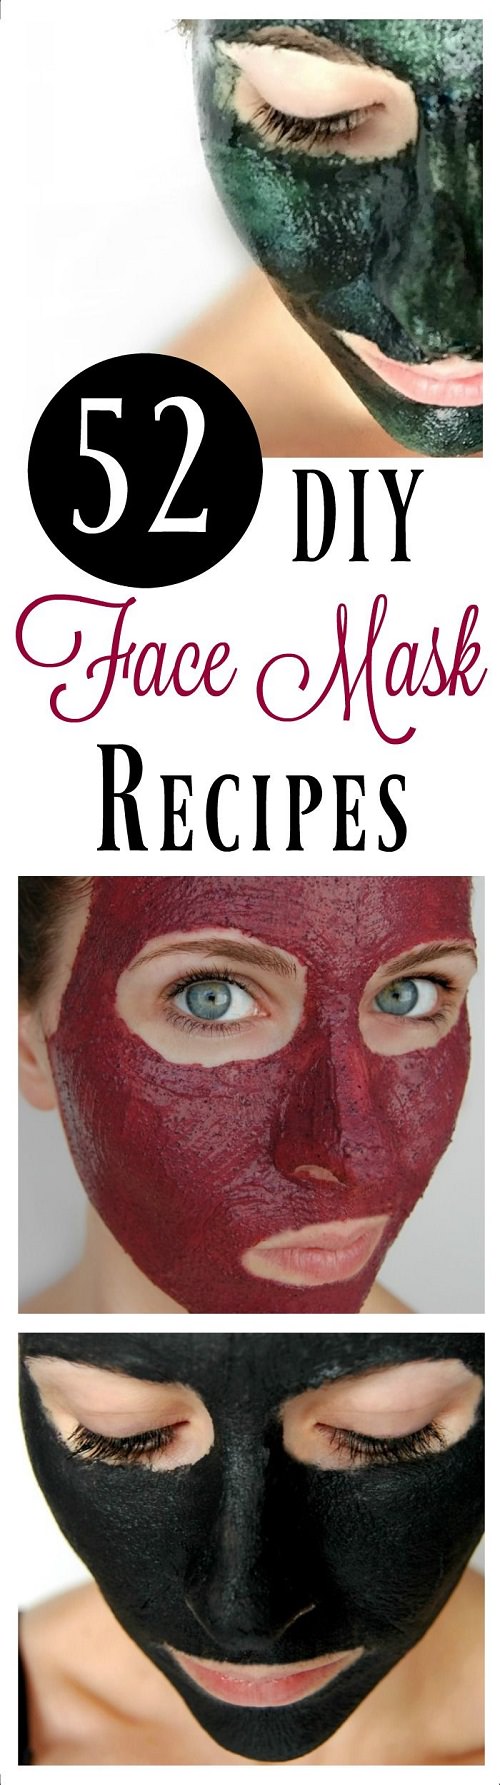 Below you’ll find 52 DIY face masks that you can make! Enjoy them by yourself or have your friends over for a spa day!